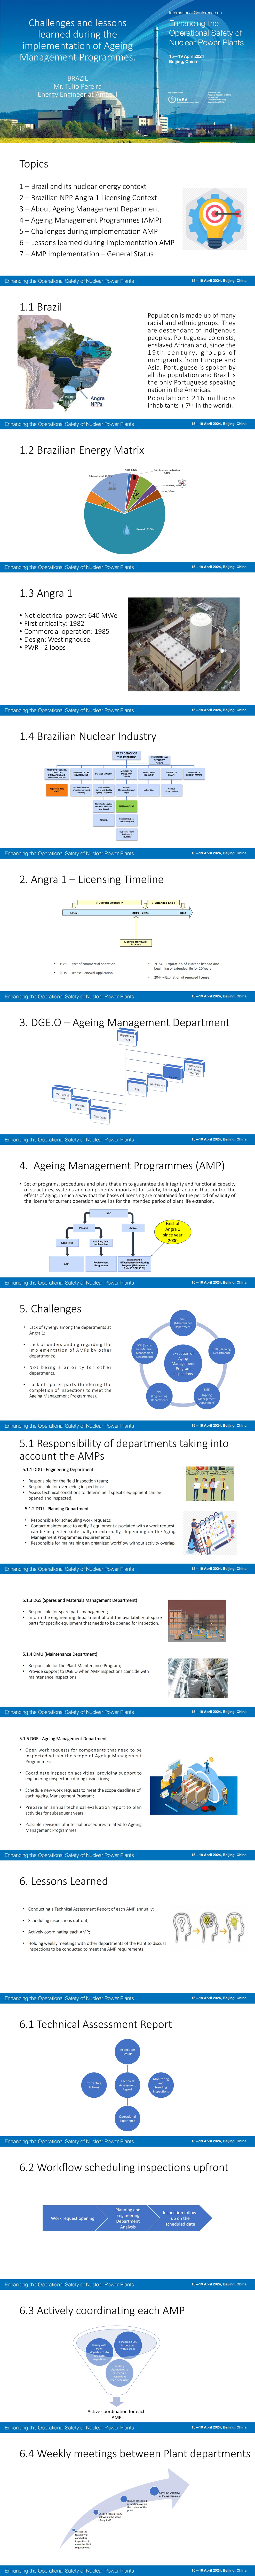 17_05_T Pereira_ Challenges and Lessons Learned During Impementation of Ageing Management Programme_00.jpg